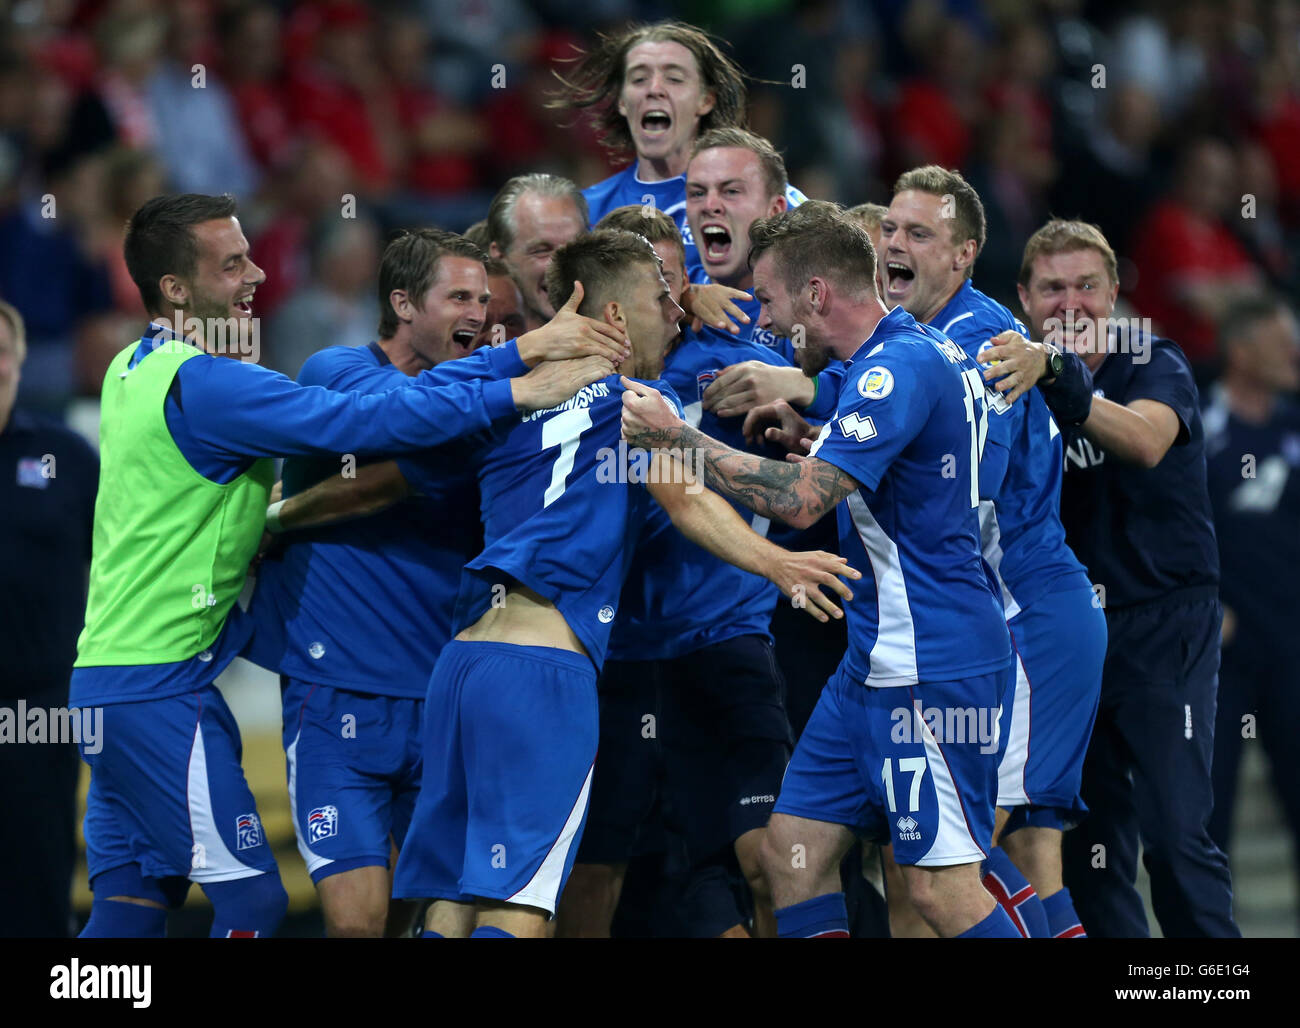 Iceland's Johan Gudmundsson (no 7) celebrates with teammates after scoring their fourth goal of the game in the final moment's of the match to draw the game. Stock Photo